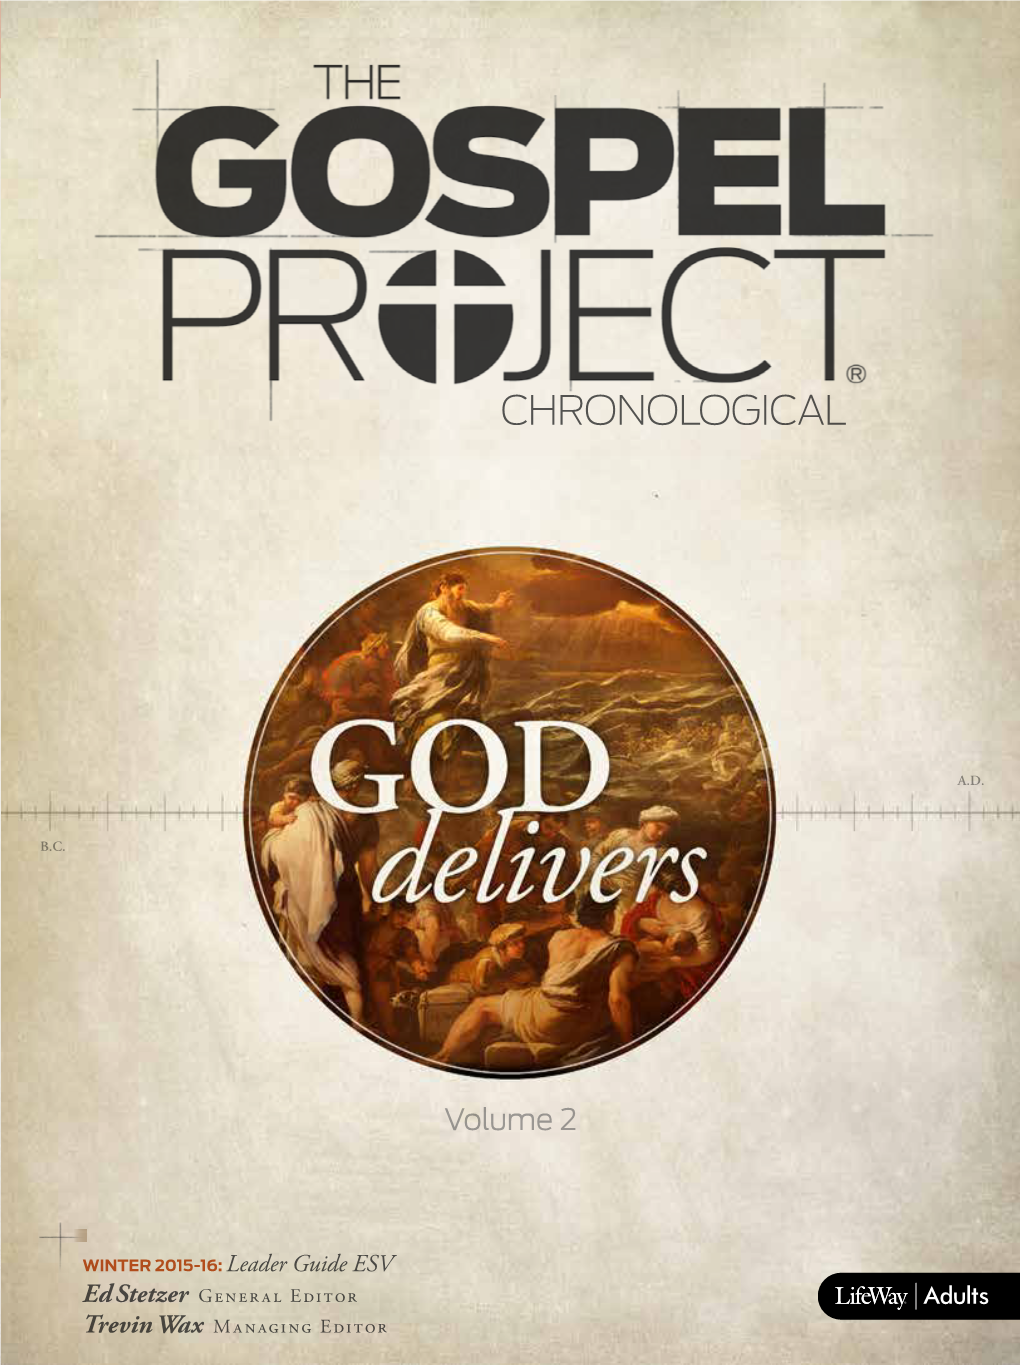 The Gospel Project Executive Director, Lifeway Research